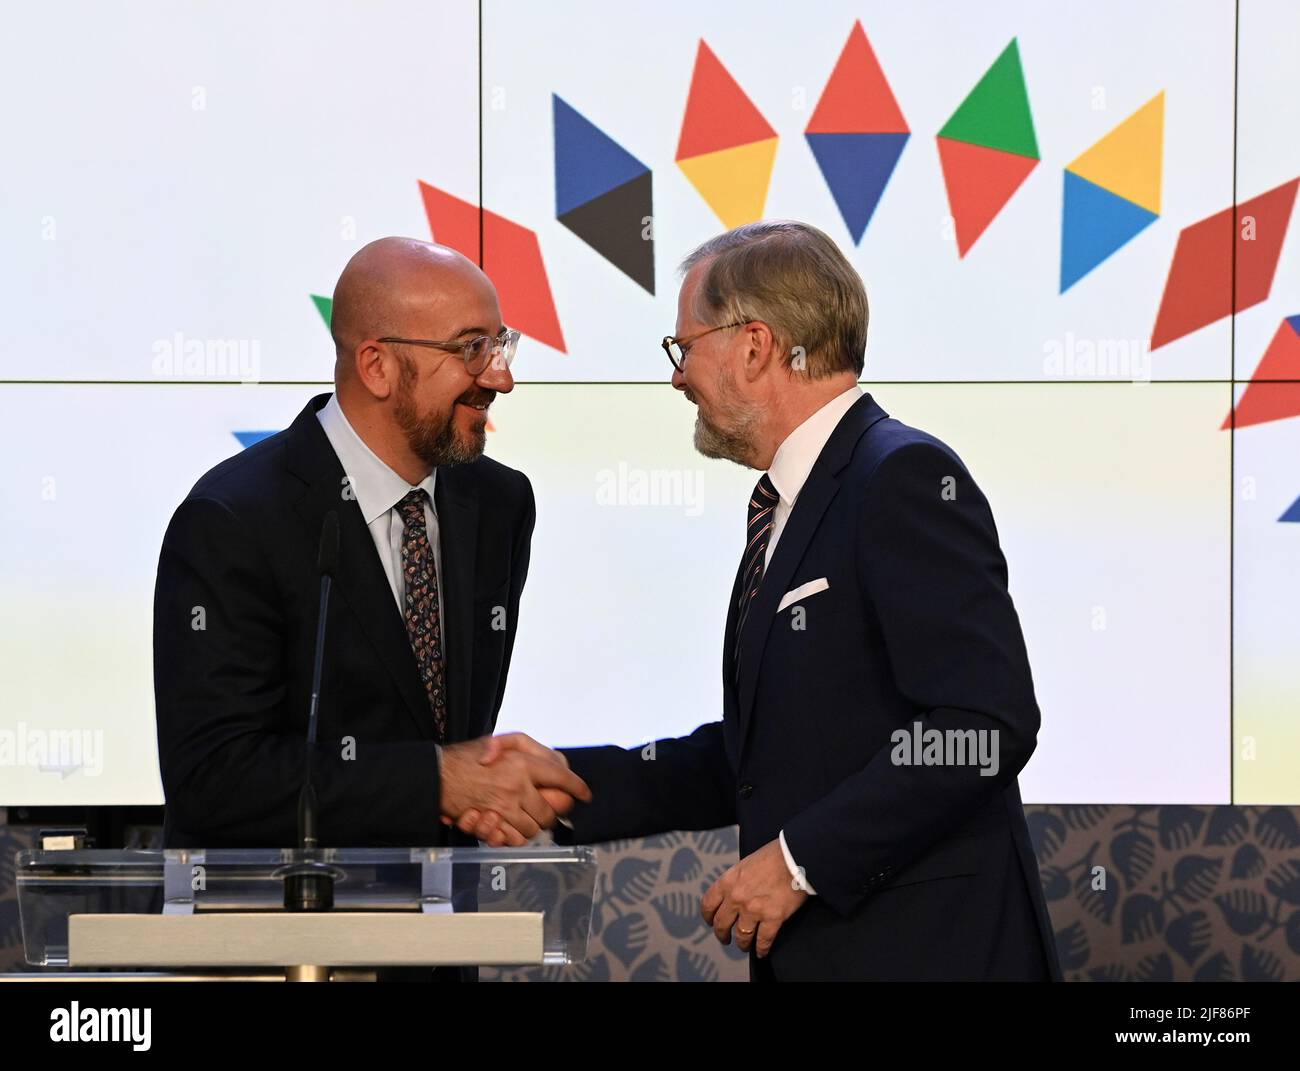 Prague, Czech Republic. 30th June, 2022. European Council head Charles Michel, left, and Czech Prime Minister Petr Fiala, right, shake hands during the press conference after meeting ahead of start of Czech EU presidency, on June 30, 2022, in Prague, Czech Republic. Credit: Michal Krumphanzl/CTK Photo/Alamy Live News Stock Photo